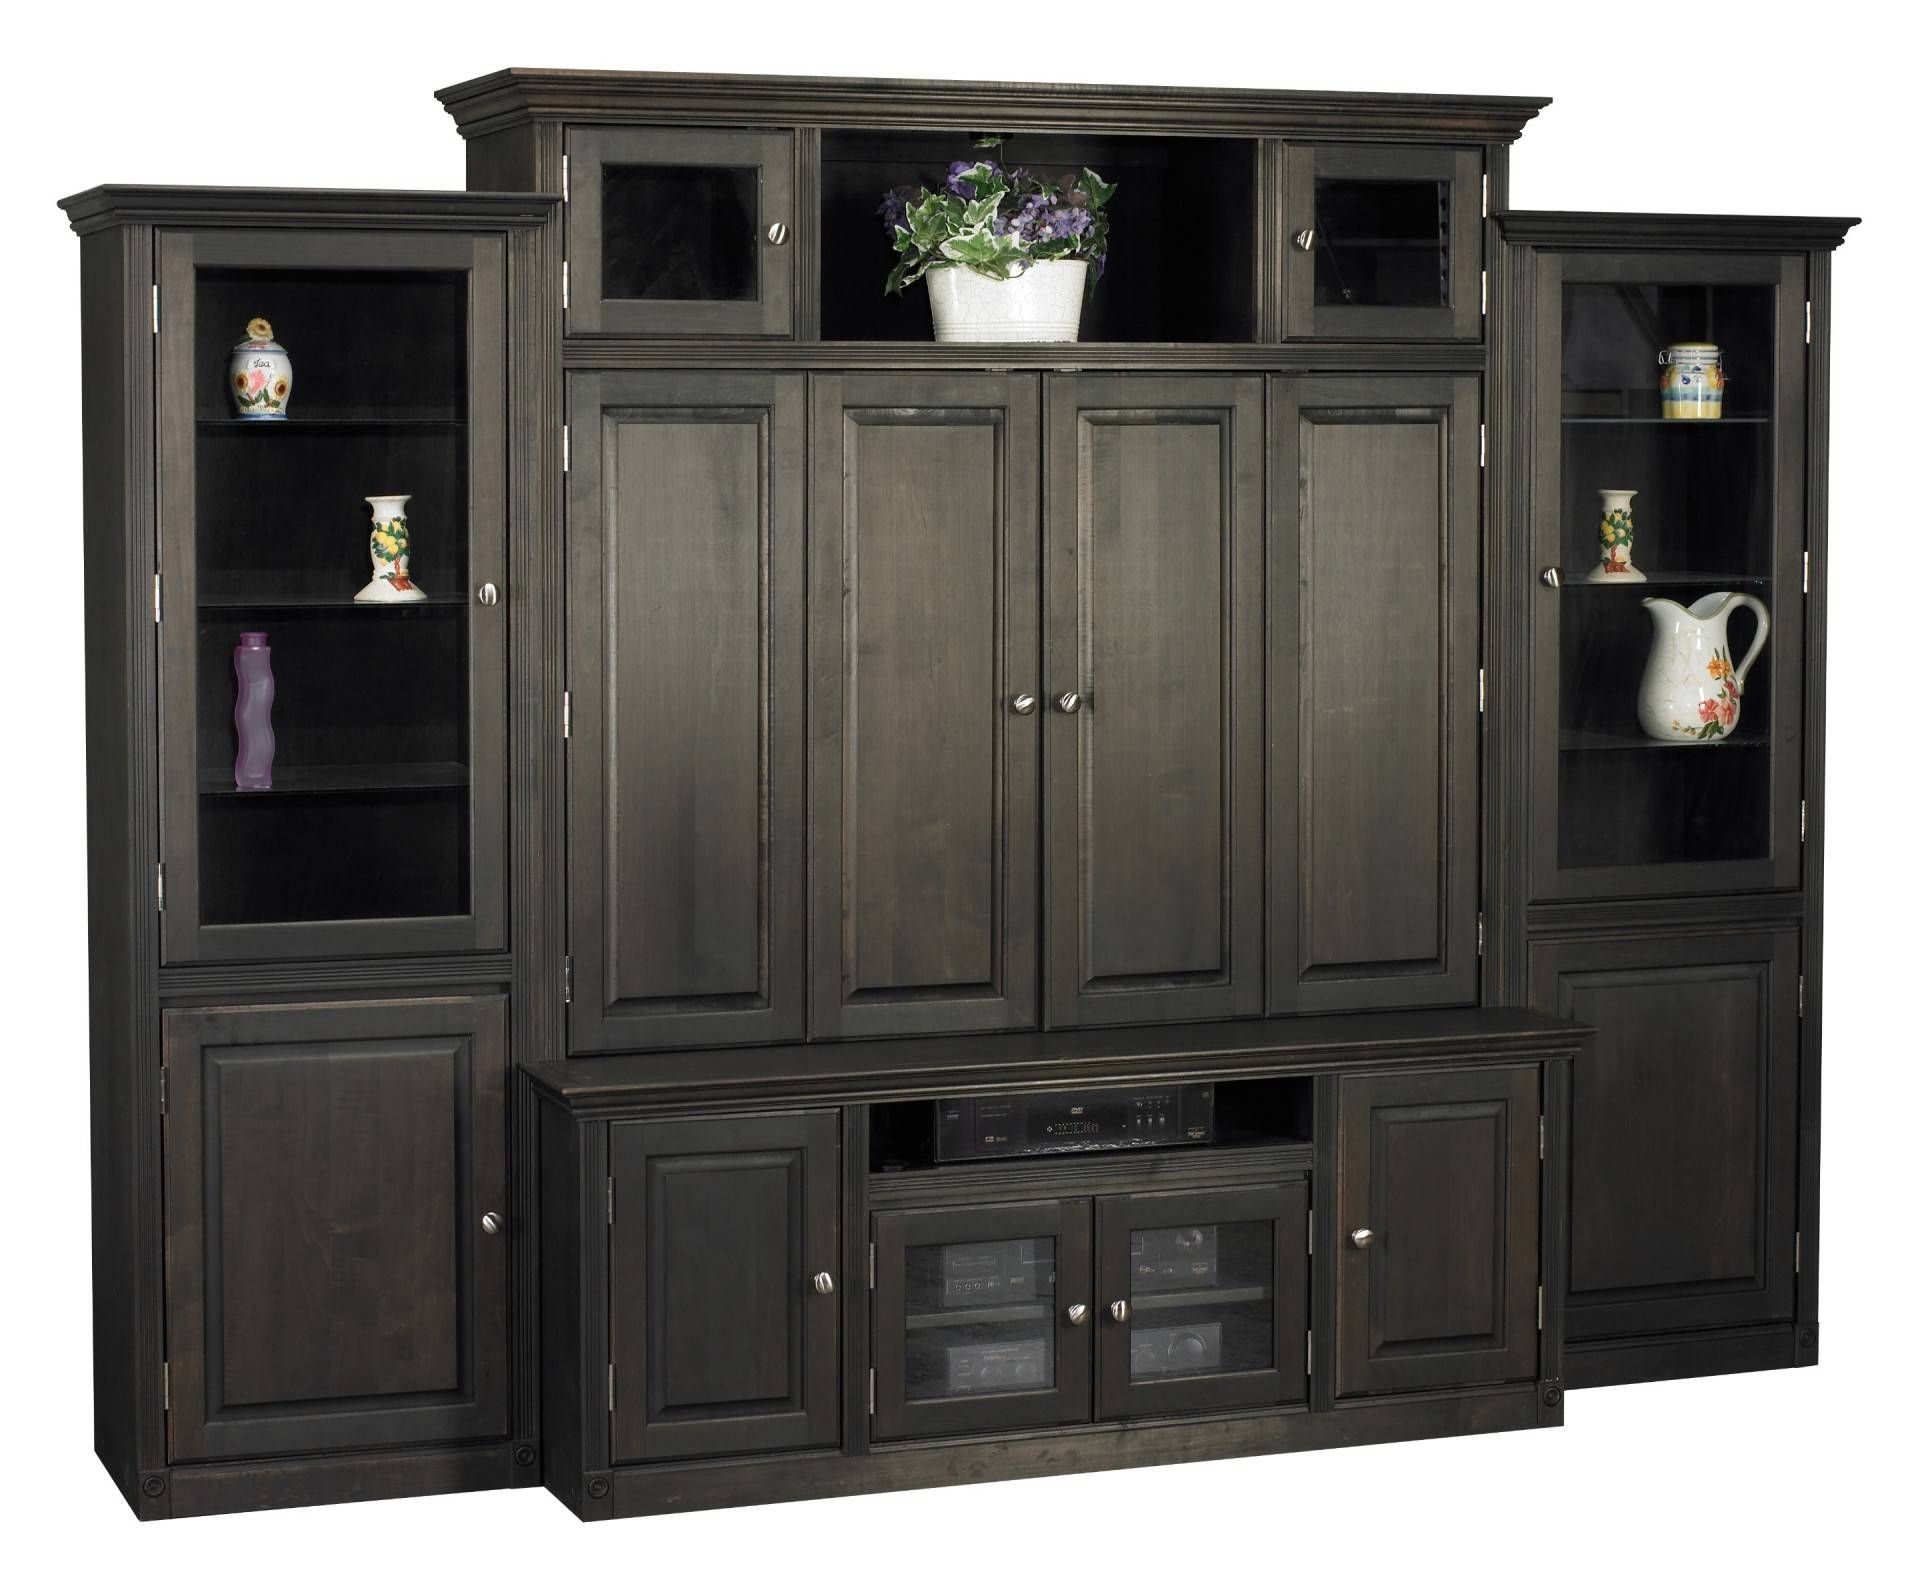 Tv Hutch With Bifold Doors For Consoles And Cabinets In Tv Hutch Cabinets (View 4 of 15)